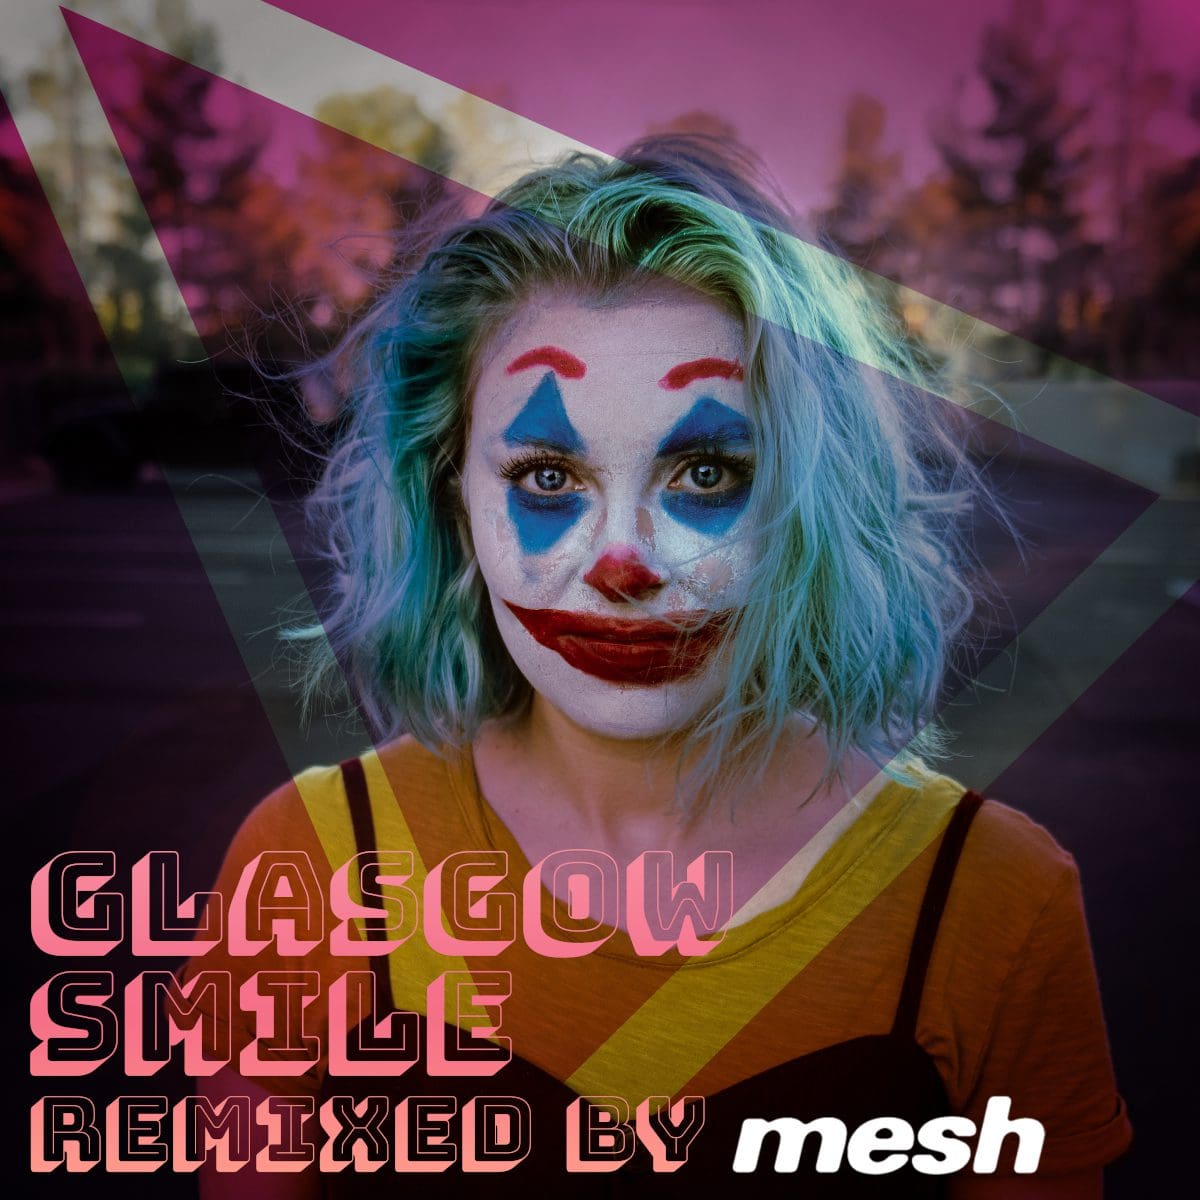 Mesh-remix of latest Covered in Snow single 'Glasgow Smile'